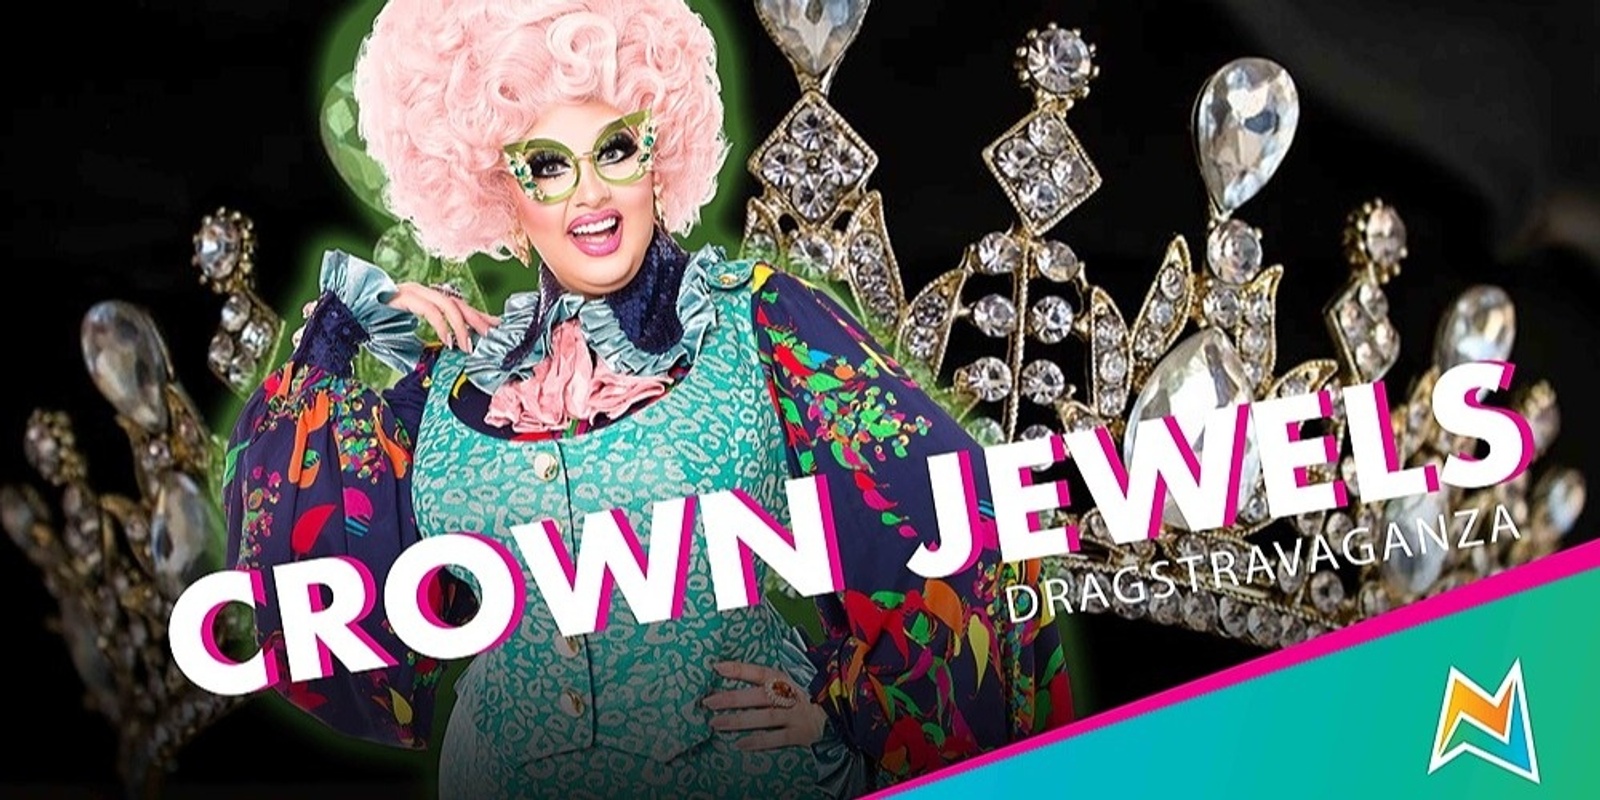 Banner image for Crown Jewels Dragstravaganza